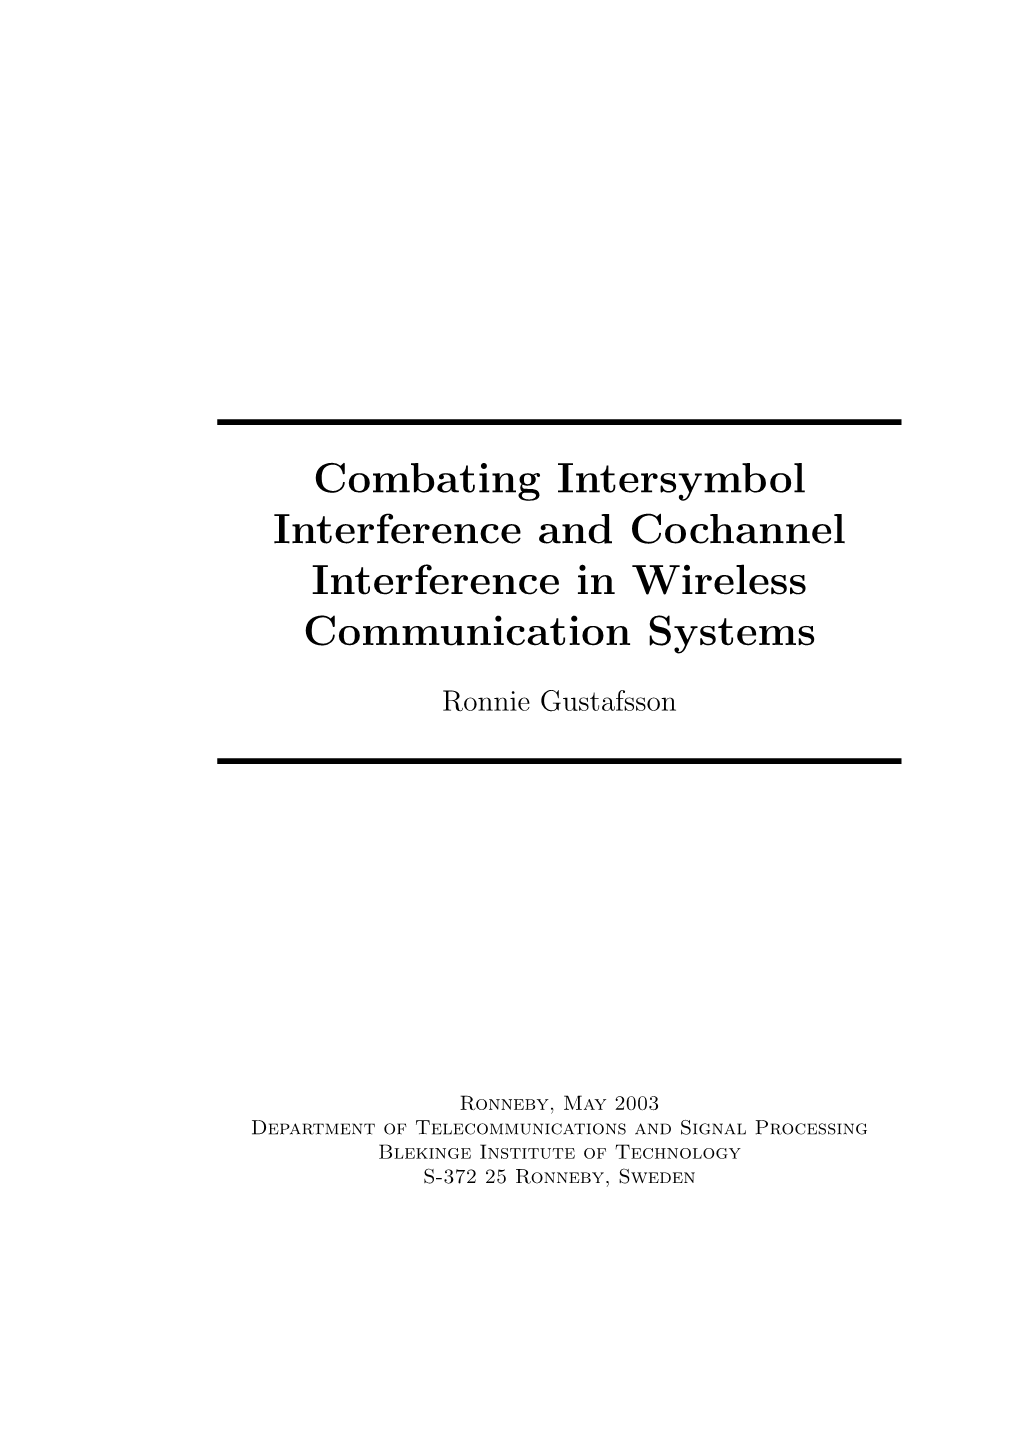 Combating Intersymbol Interference and Cochannel Interference in Wireless Communication Systems Ronnie Gustafsson